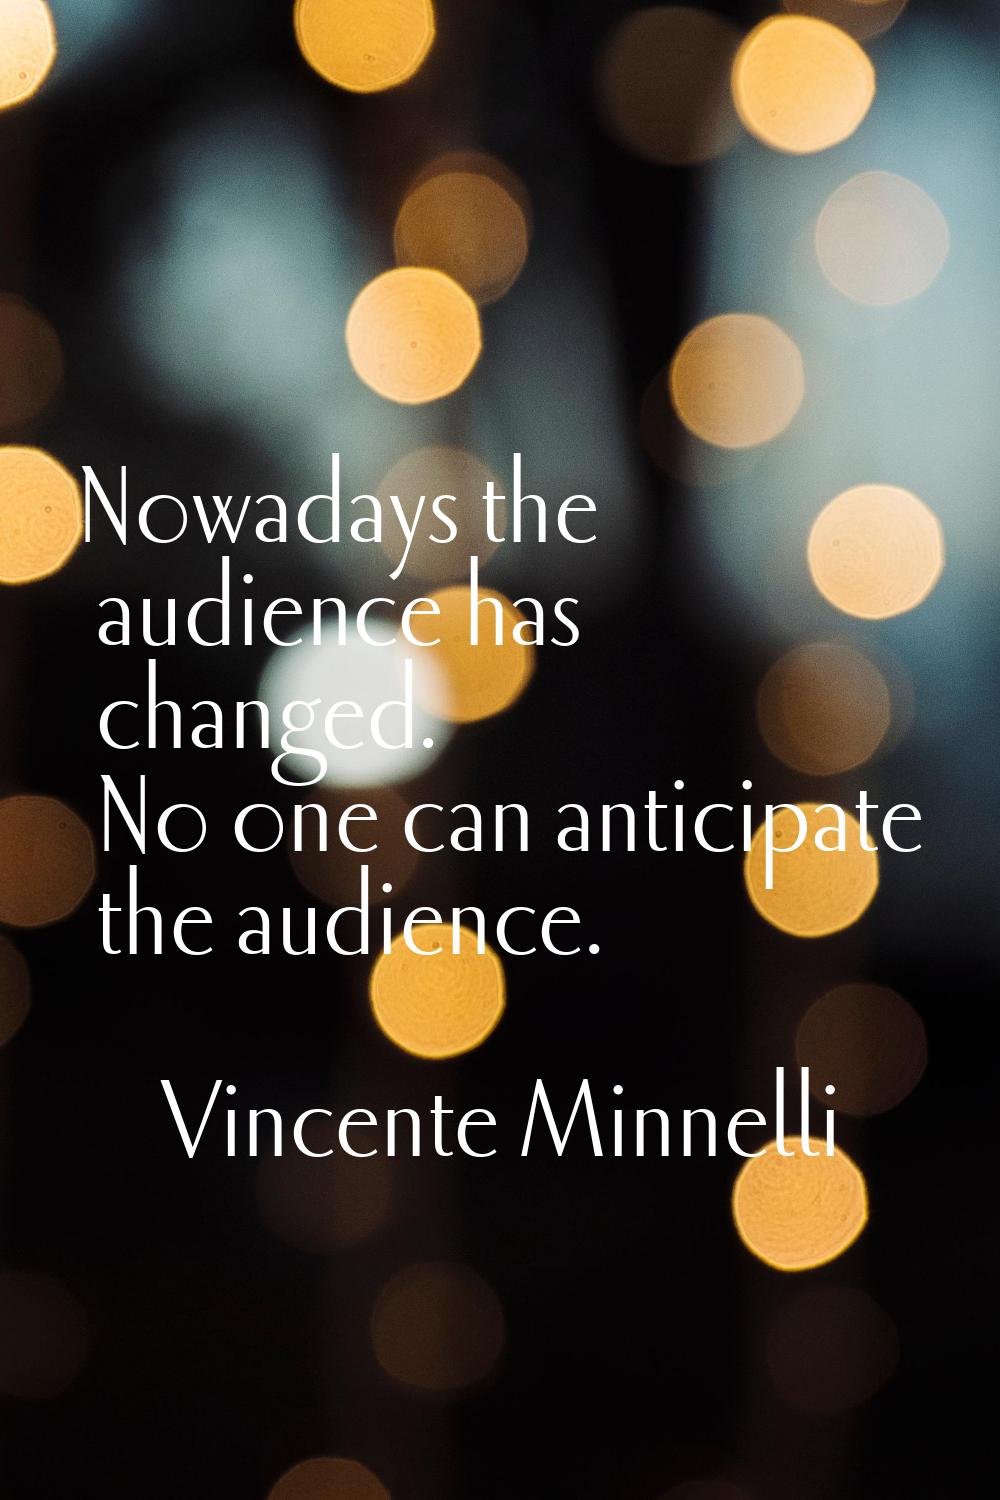 Nowadays the audience has changed. No one can anticipate the audience.